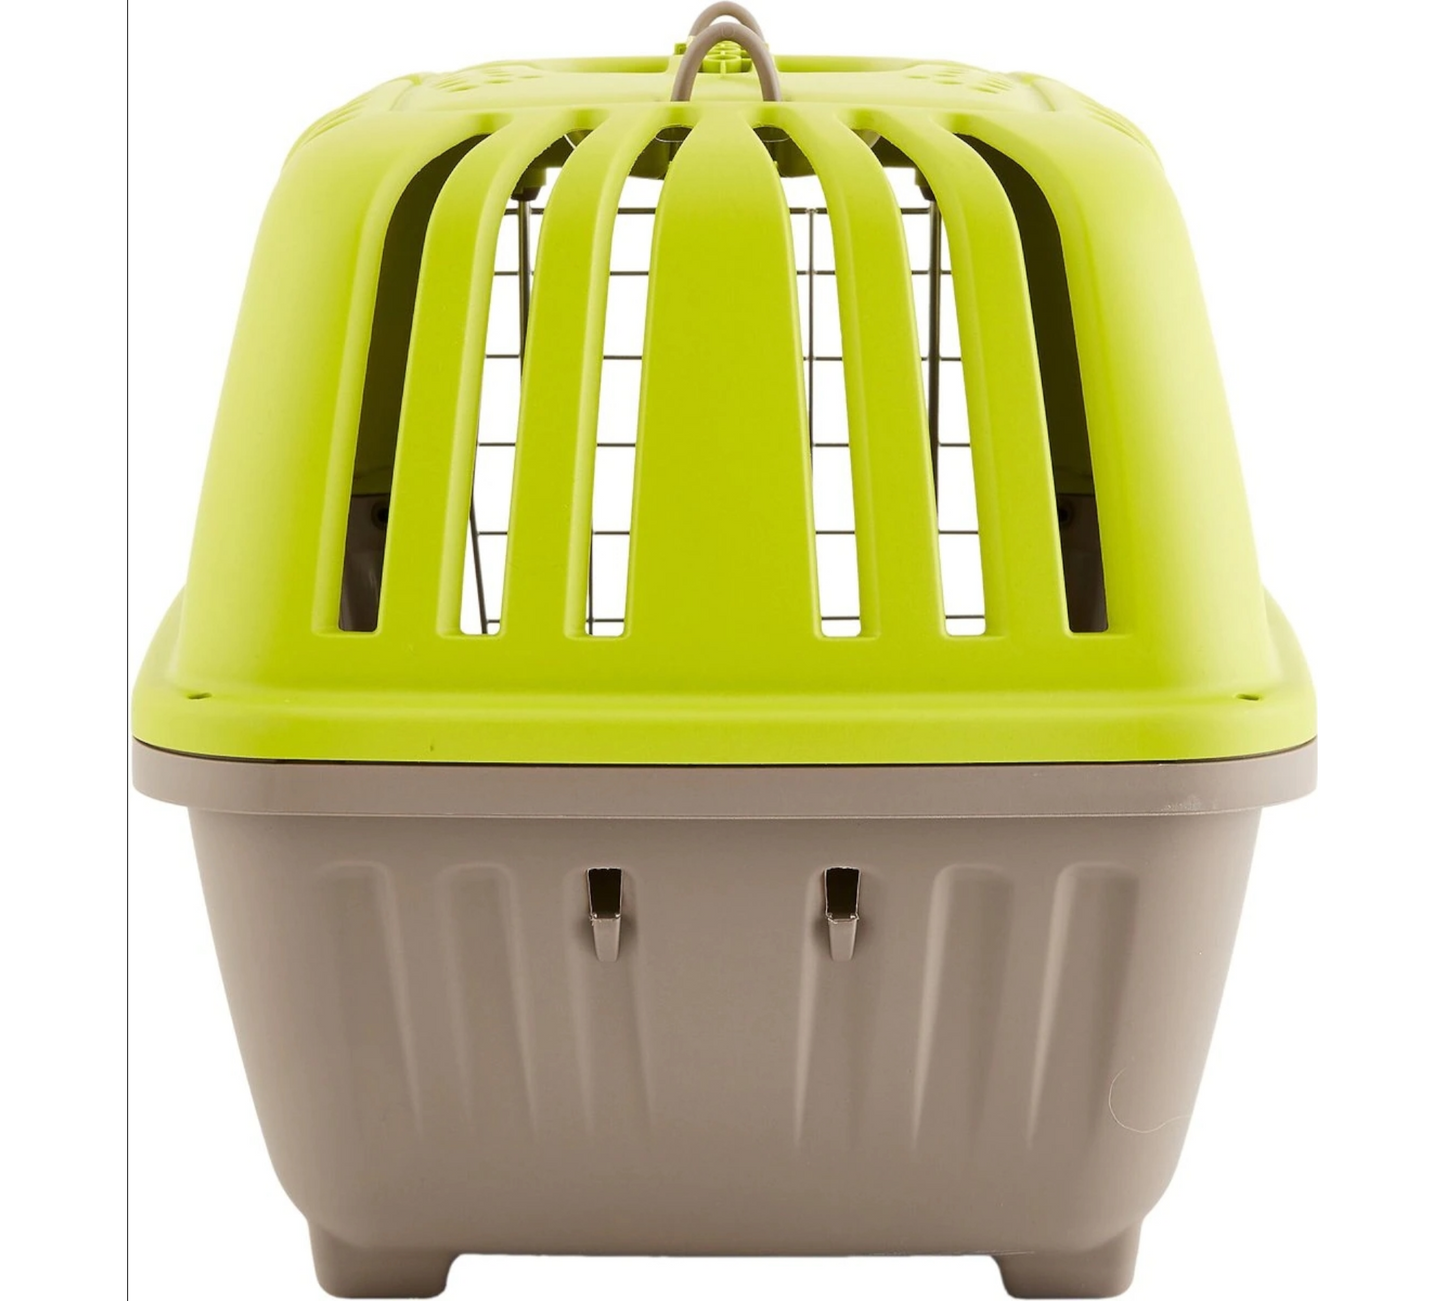 MidWest Spree Plastic Dog & Cat Kennel